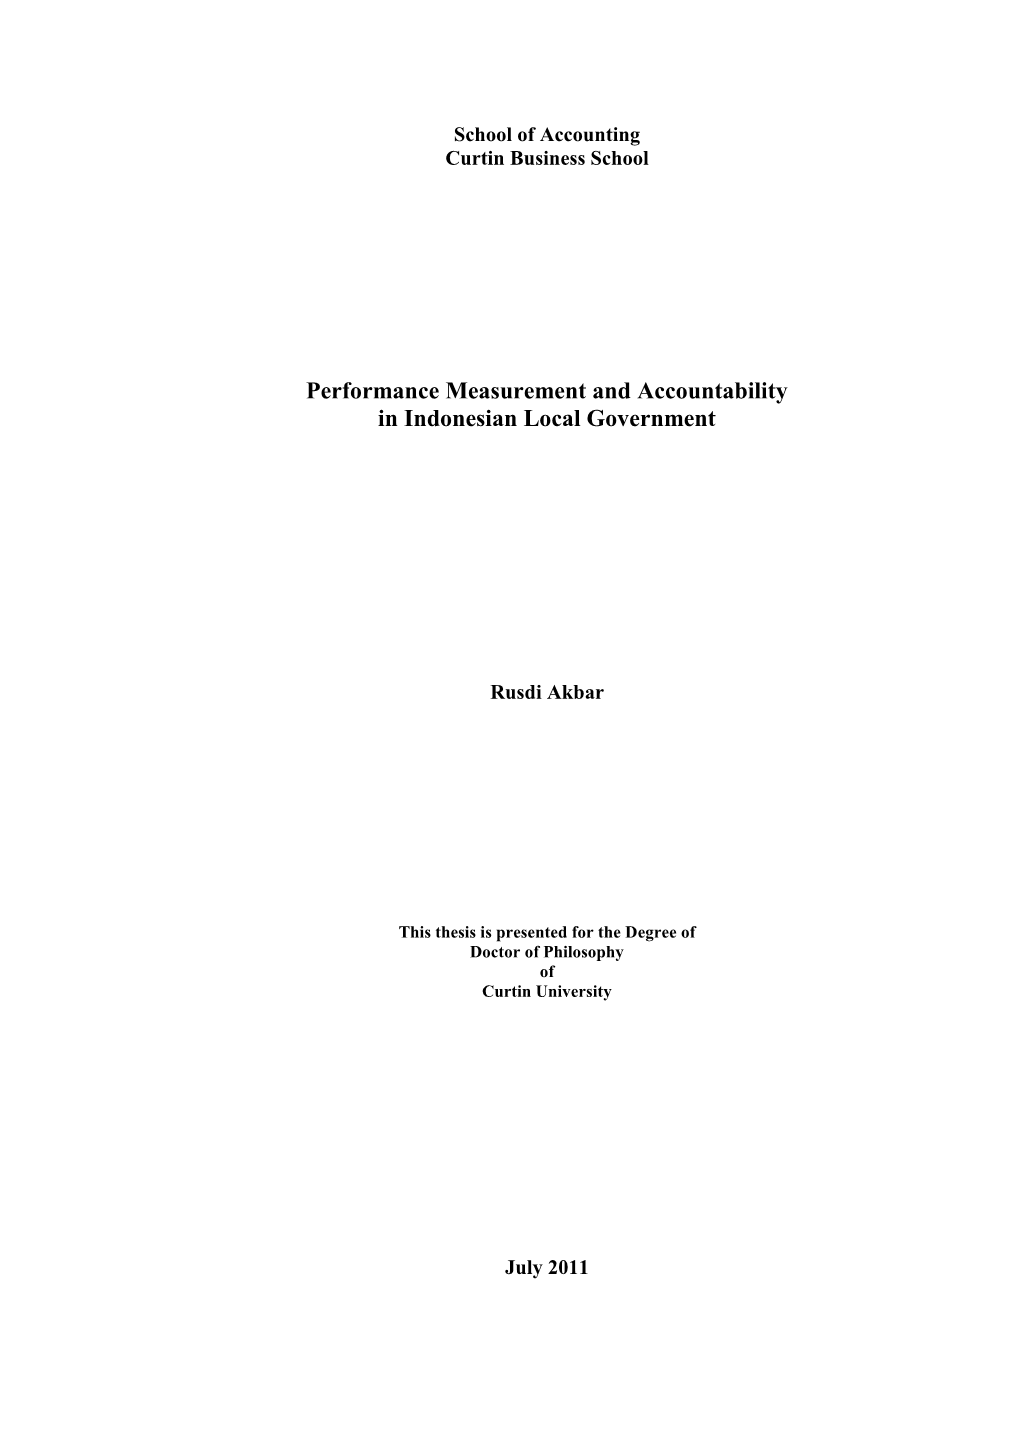 Performance Measurement and Accountability in Indonesian Local Government